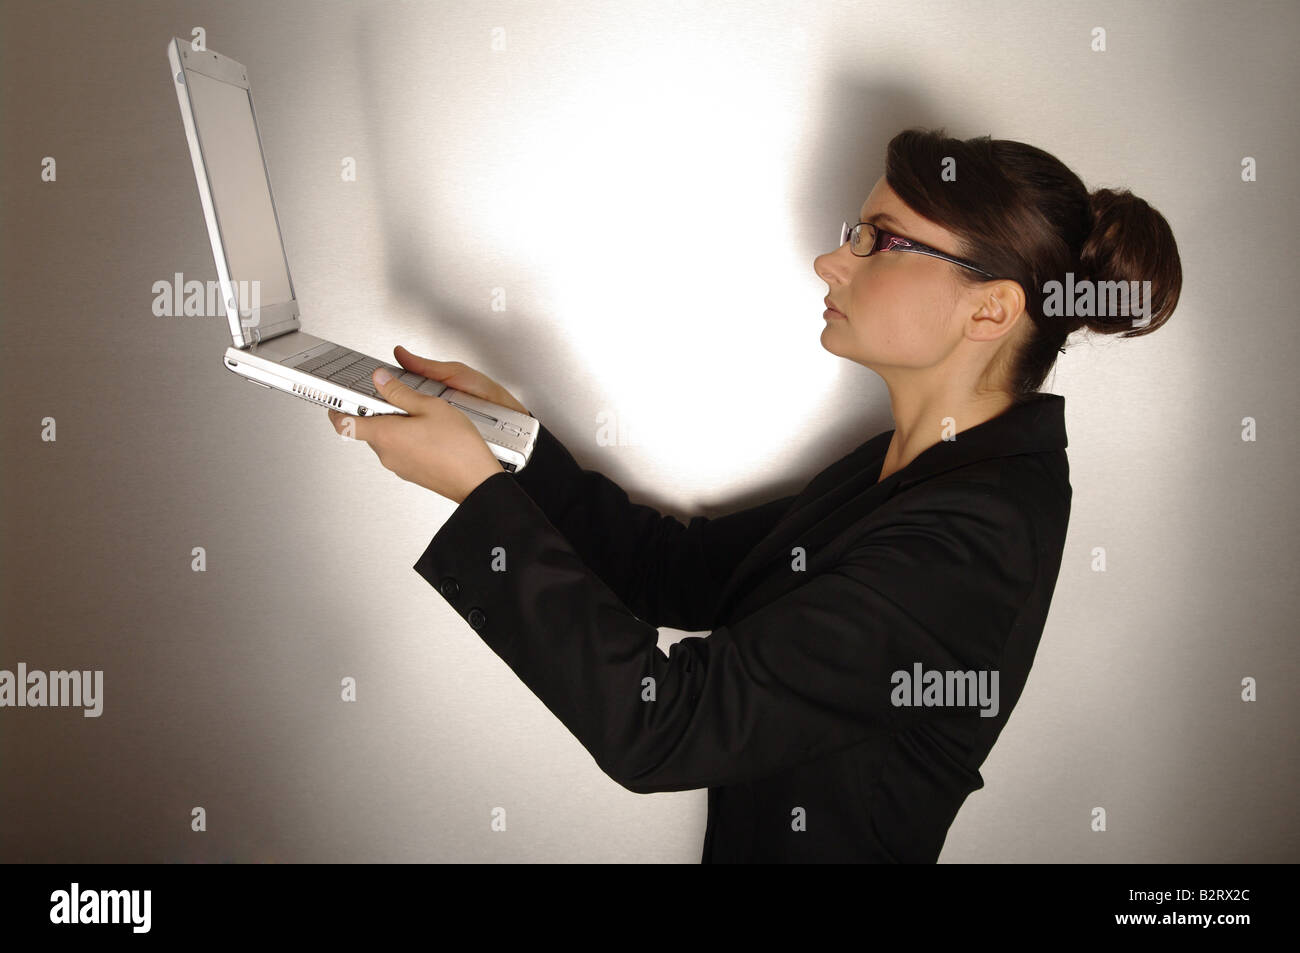 Businesswoman aged 24 holding a laptop Stock Photo